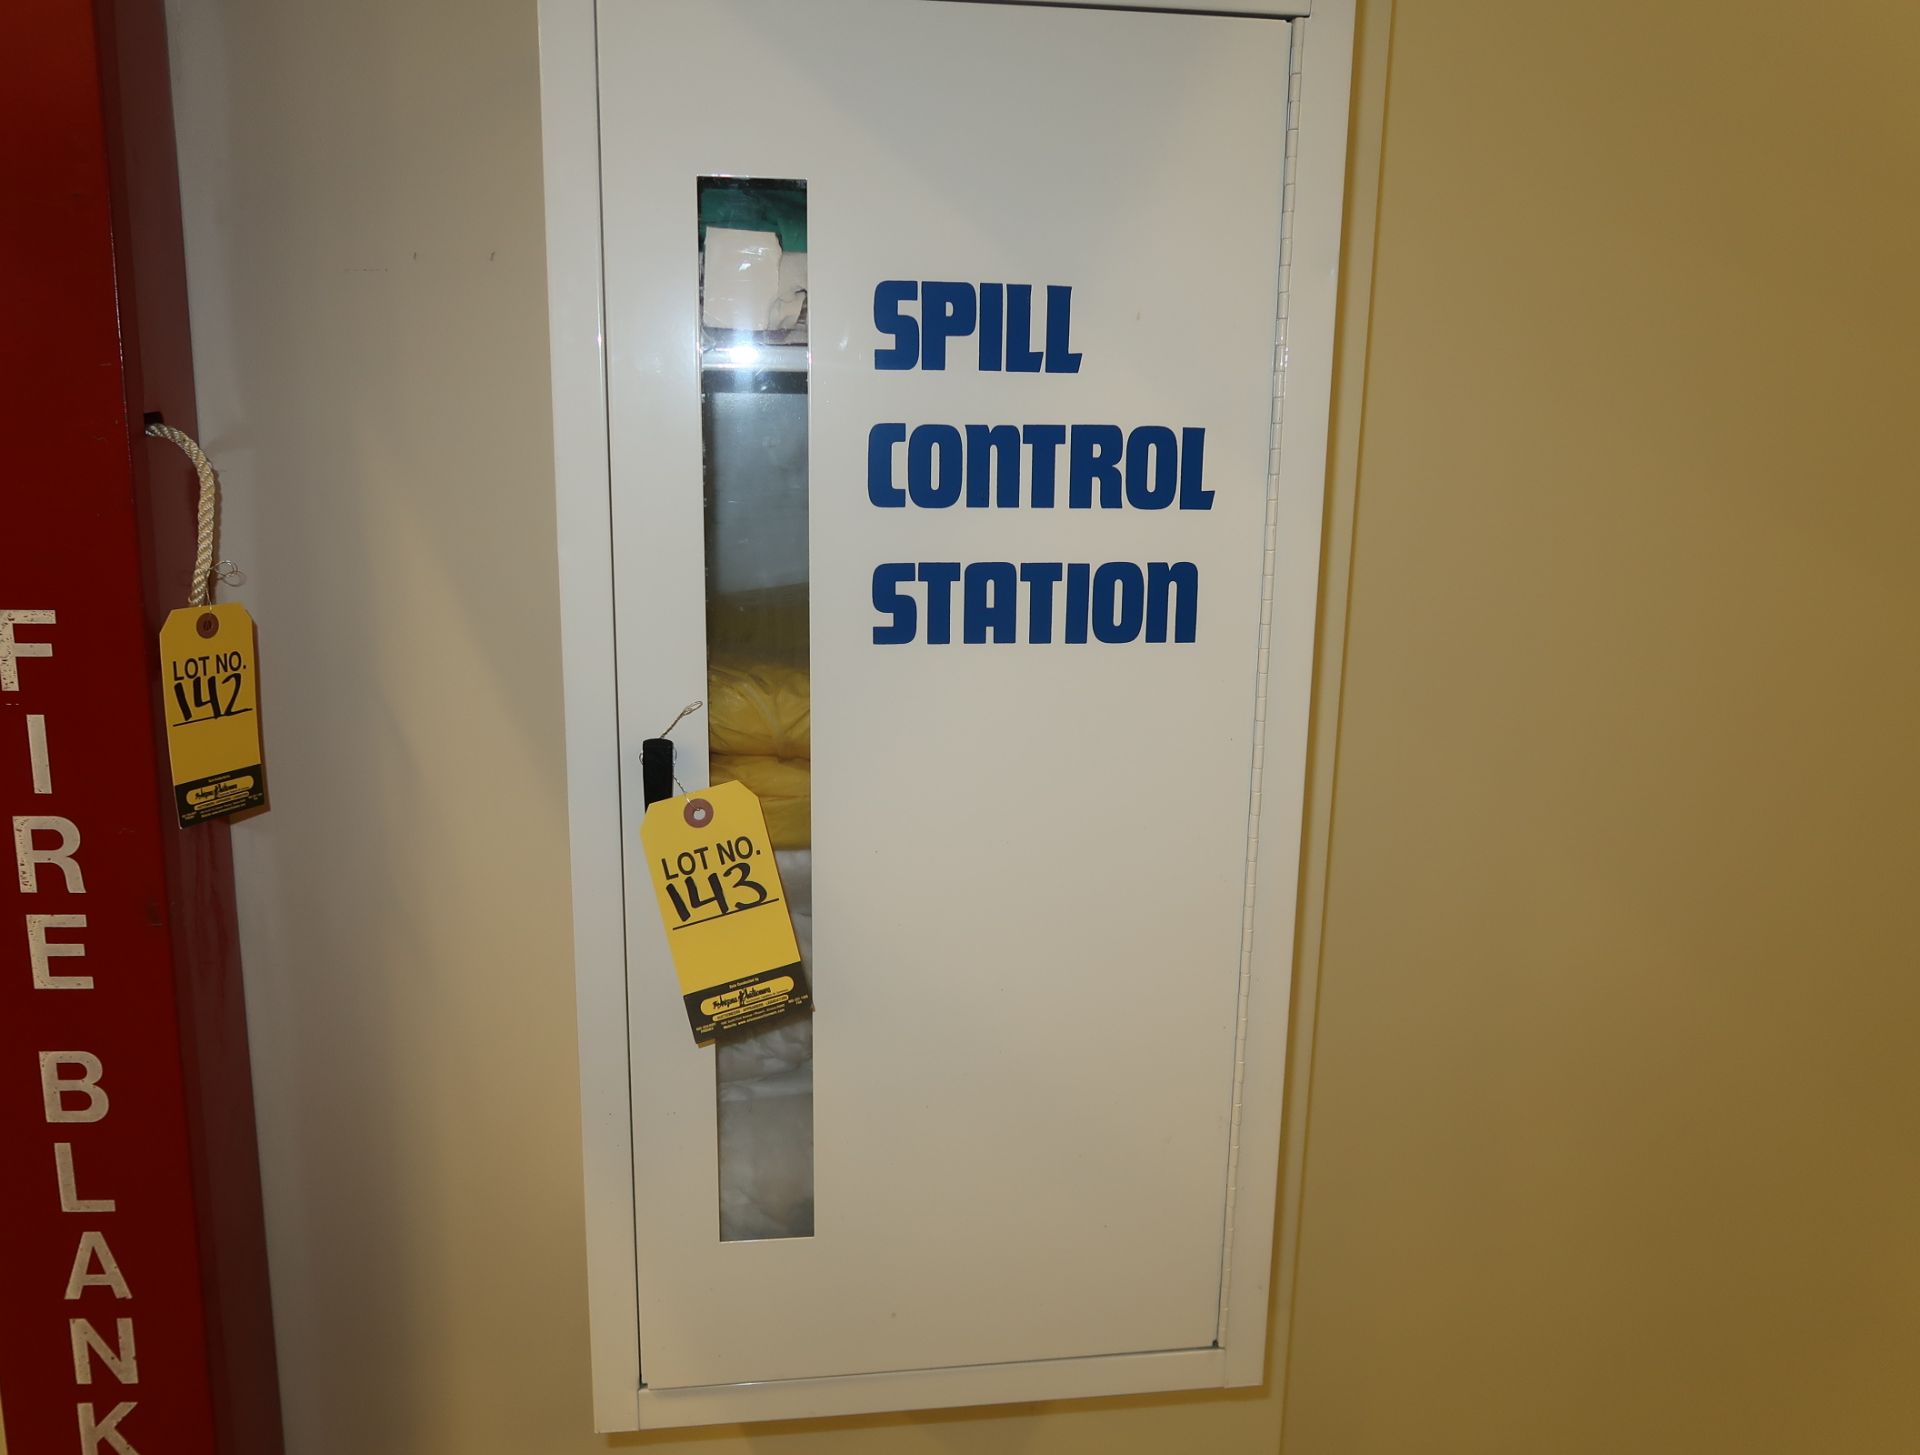 SPILL CONTROL STATION